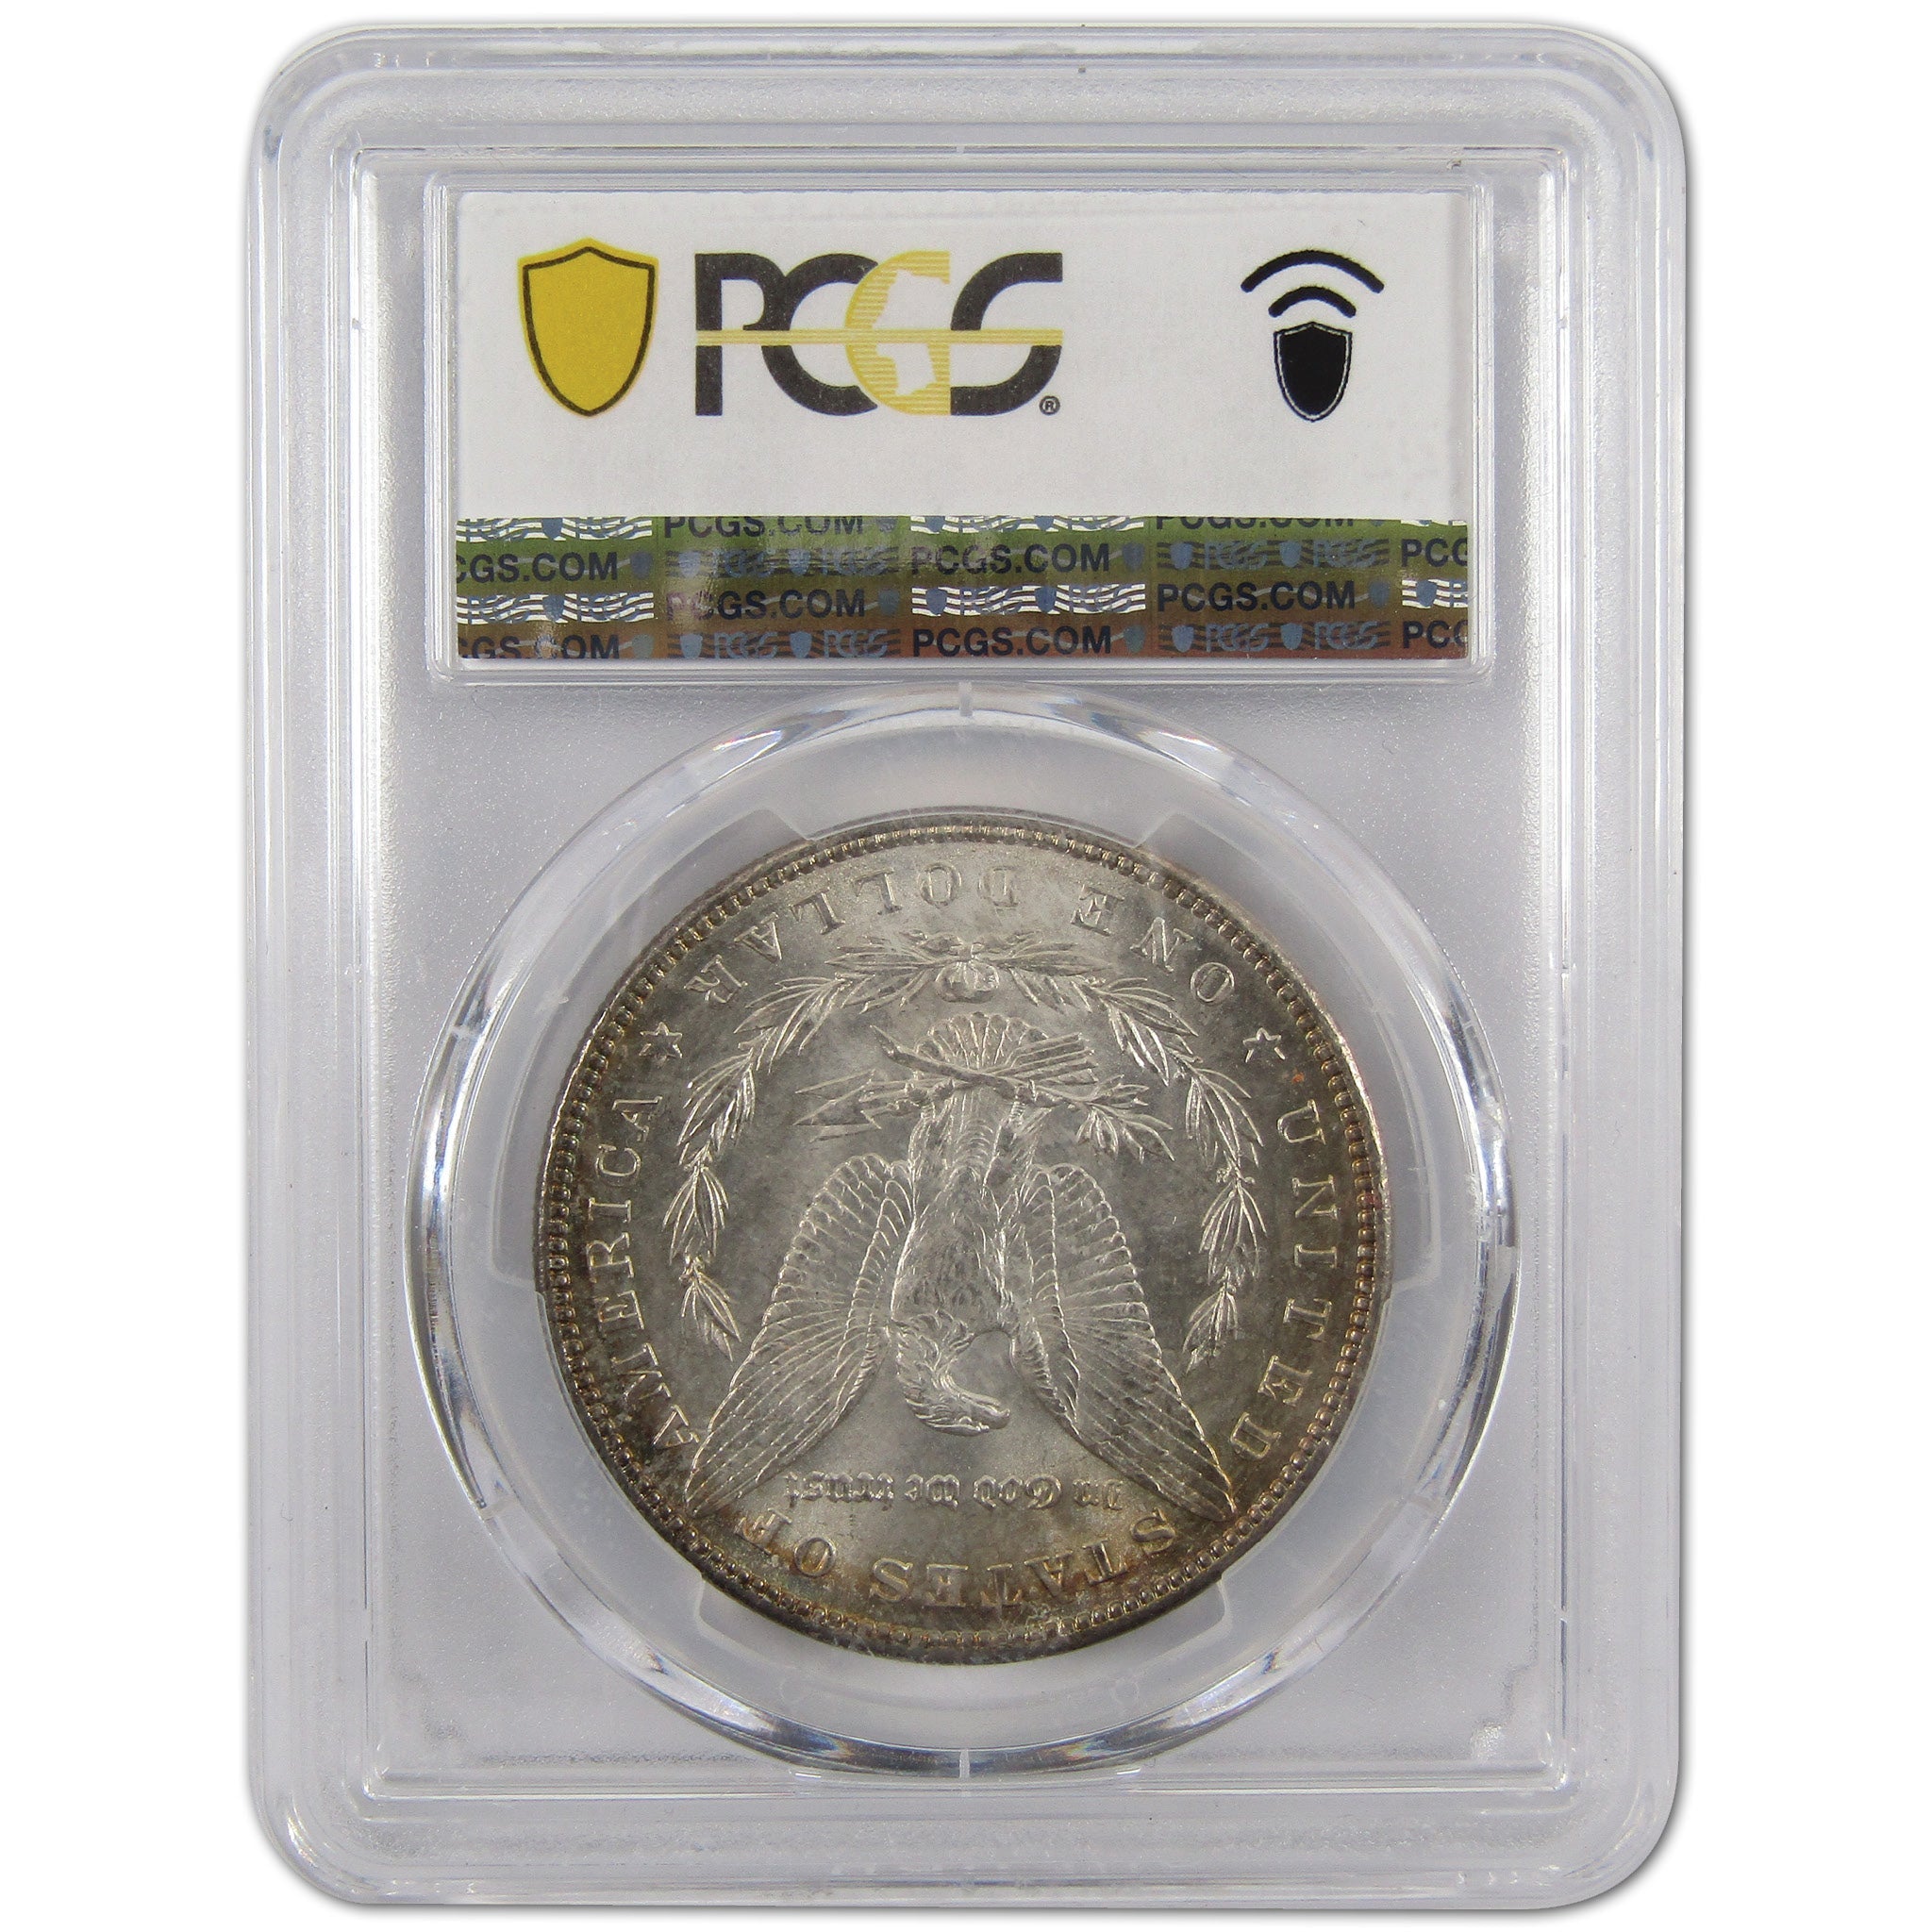 1897 Morgan Dollar MS 64 PCGS Silver $1 Uncirculated Coin SKU:I10892 - Morgan coin - Morgan silver dollar - Morgan silver dollar for sale - Profile Coins &amp; Collectibles